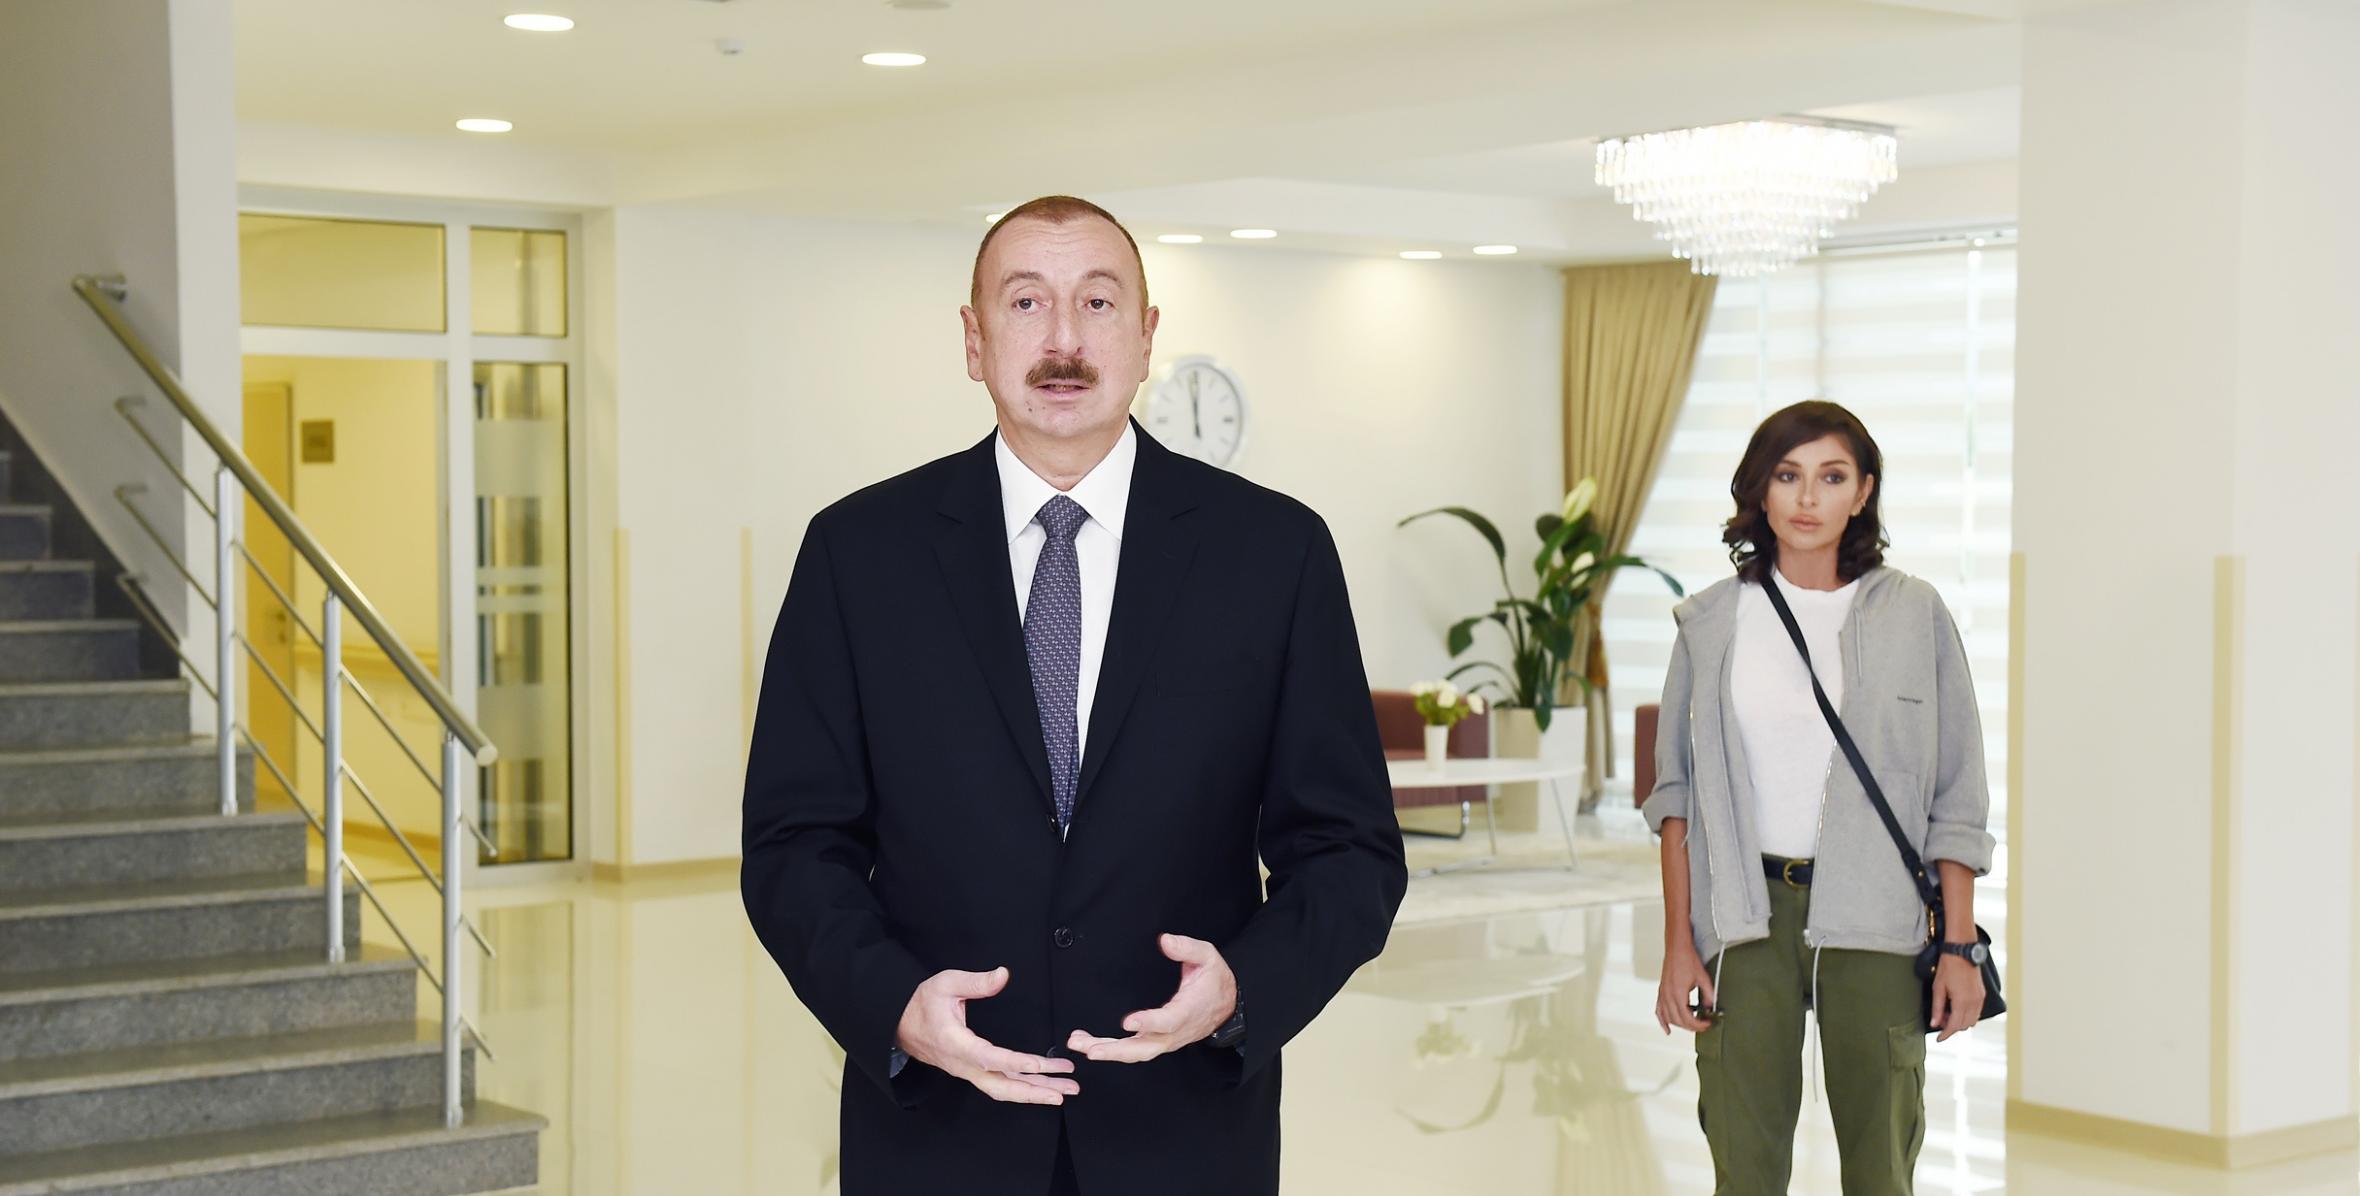 Speech by Ilham Aliyev at the opening of Guba District Central Hospital